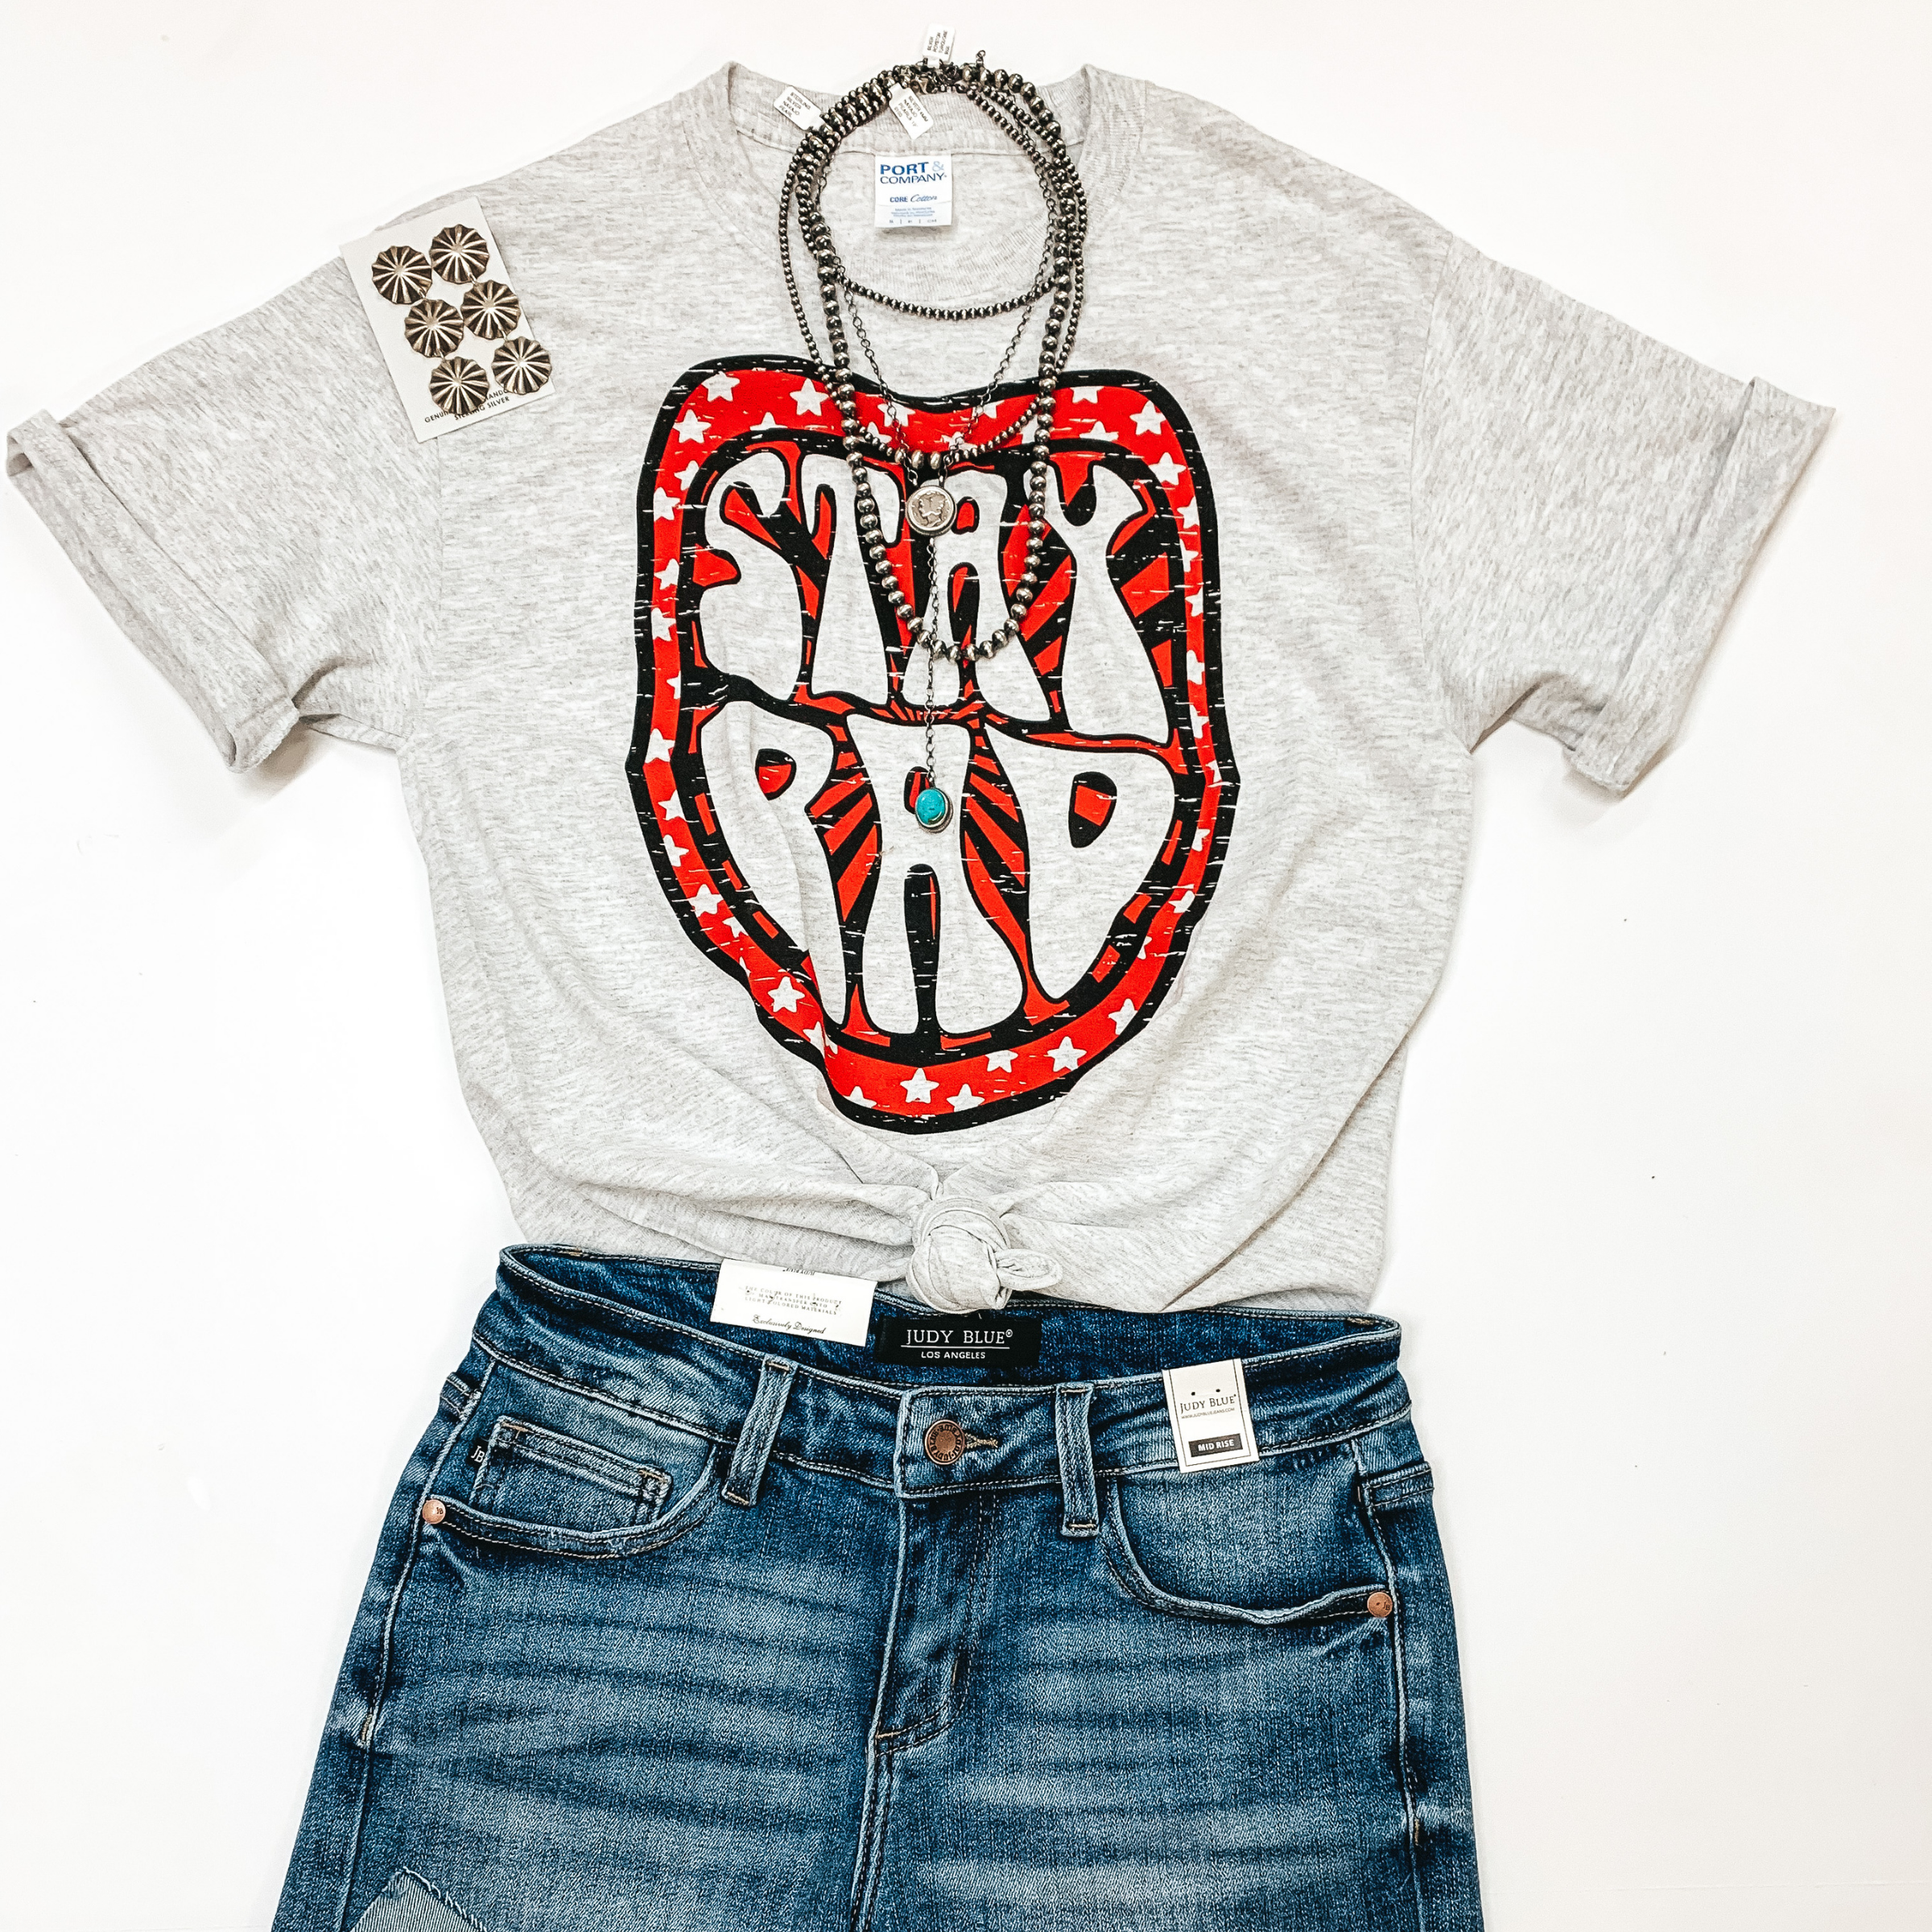 Stay Rad Short Sleeve Graphic Tee in Heather Grey - Giddy Up Glamour Boutique